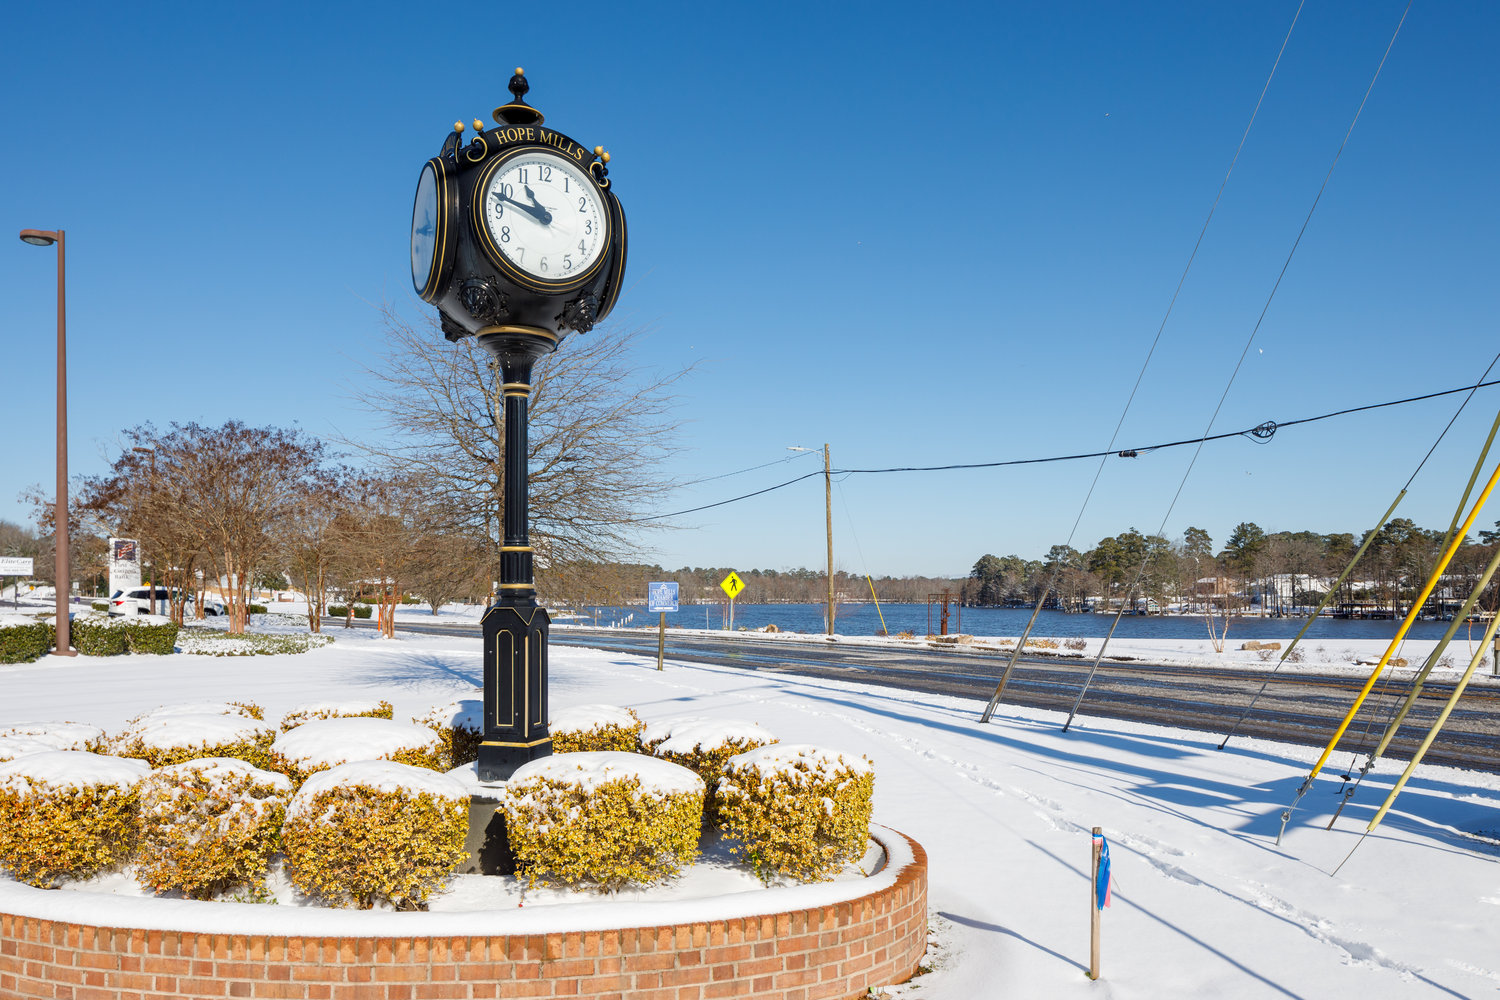 Hope Mills saw 4 inches of snow, the National Weather Service said Saturday.